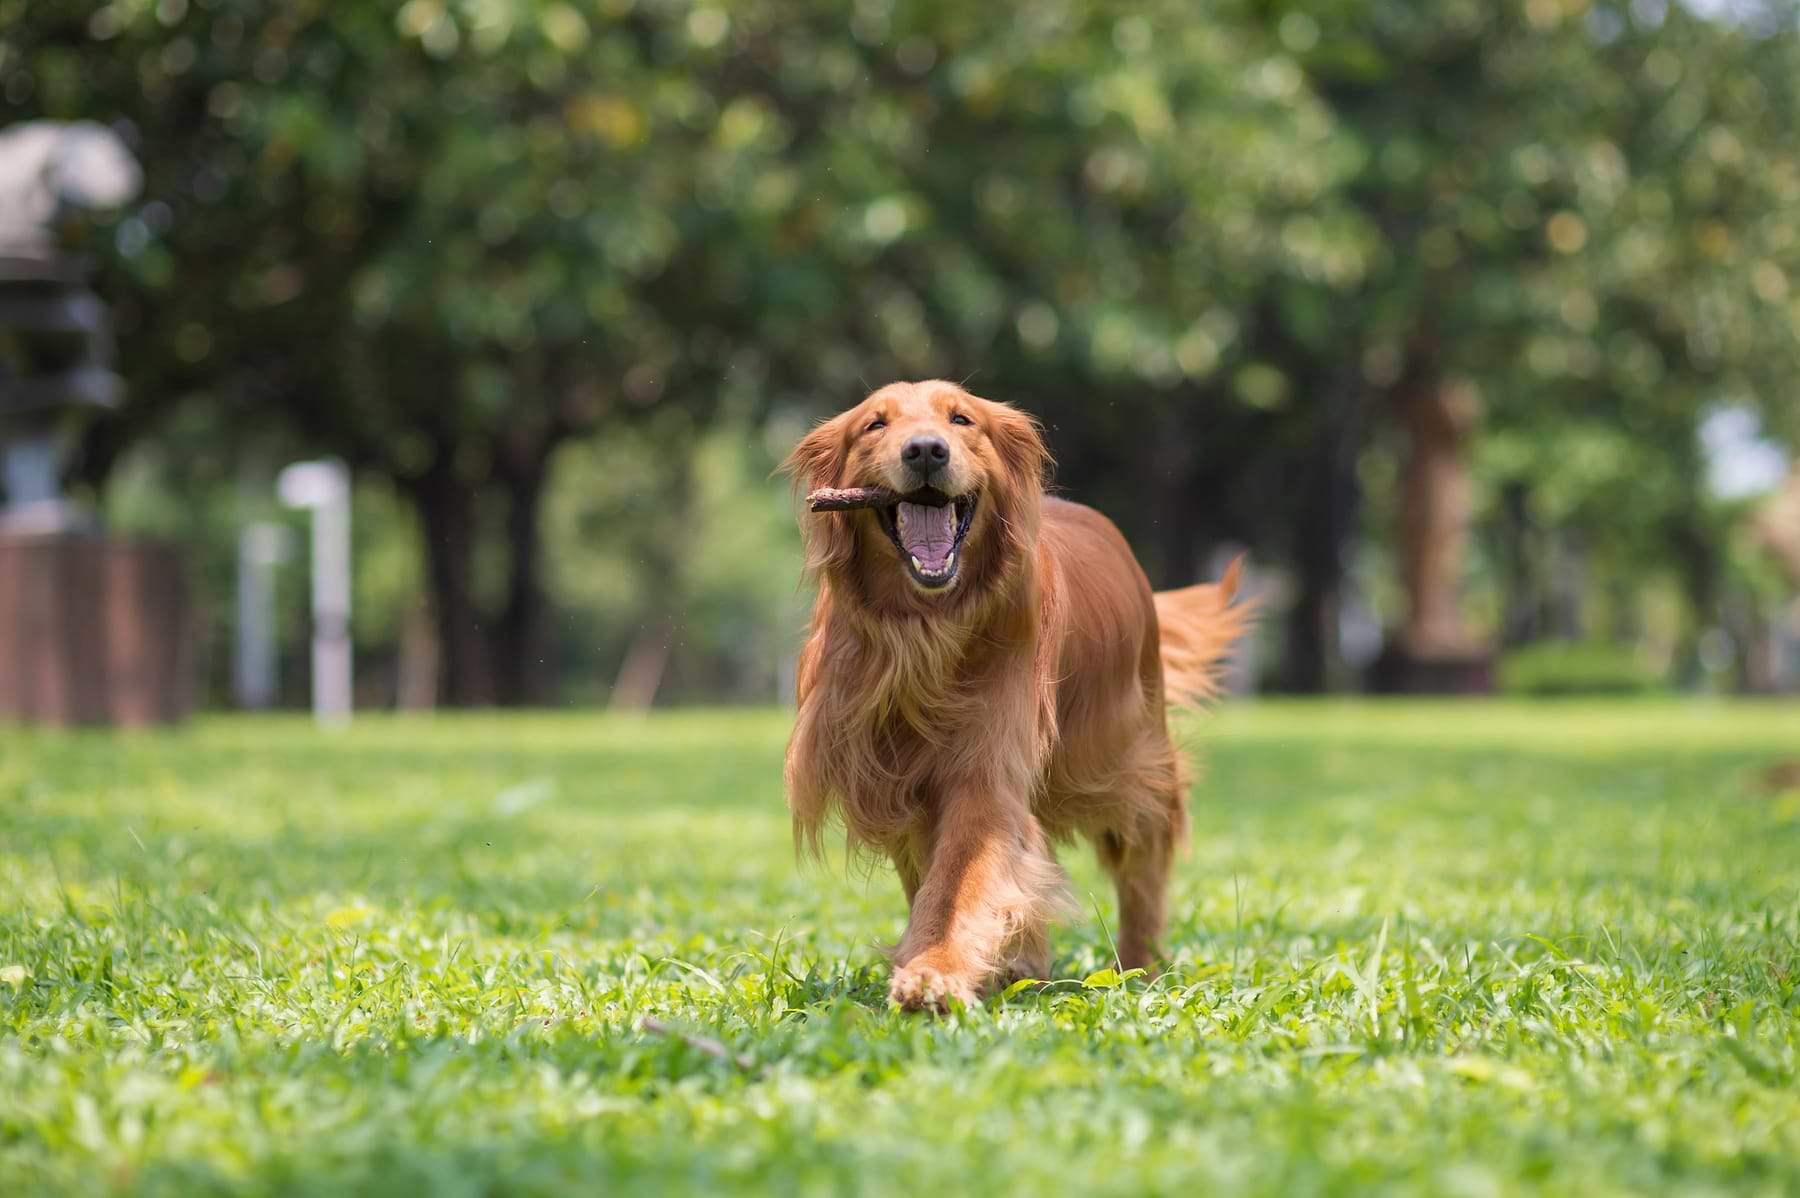 A Golden Retriever is smiling with a stick on its mouth